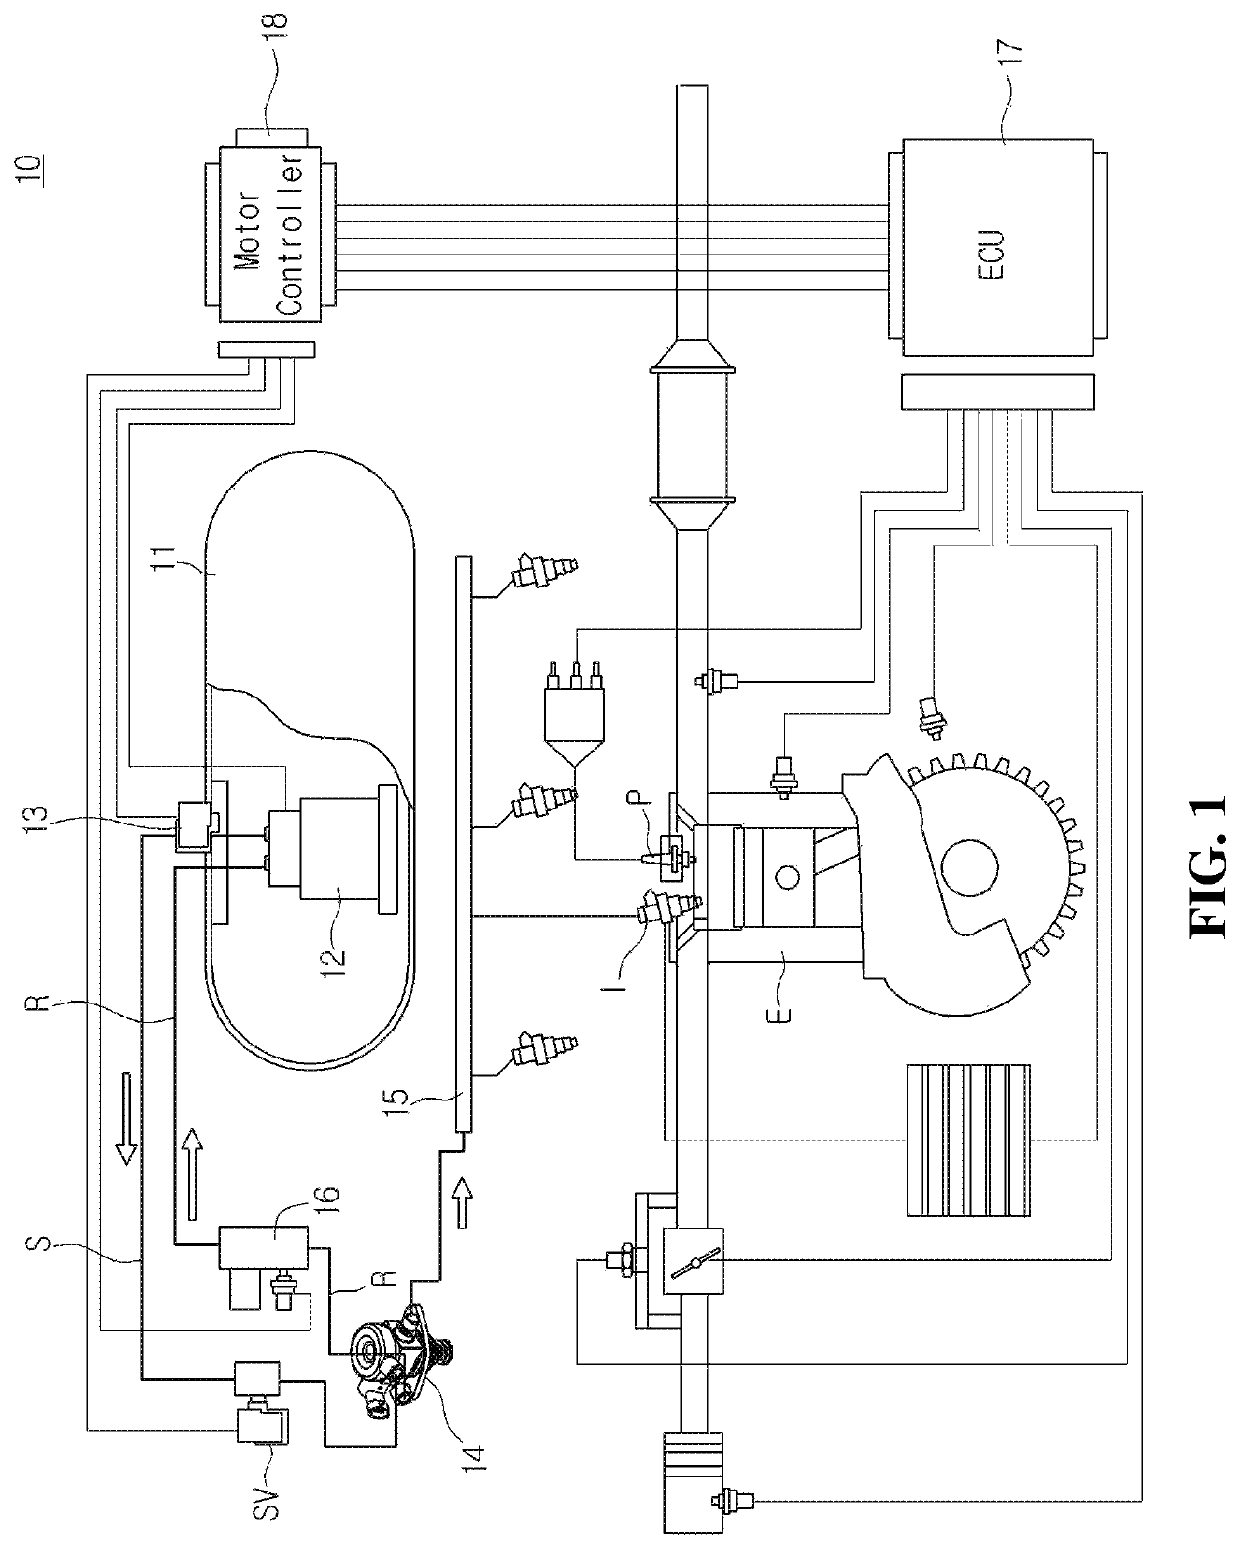 High pressure fuel pump and LPDI system with the same